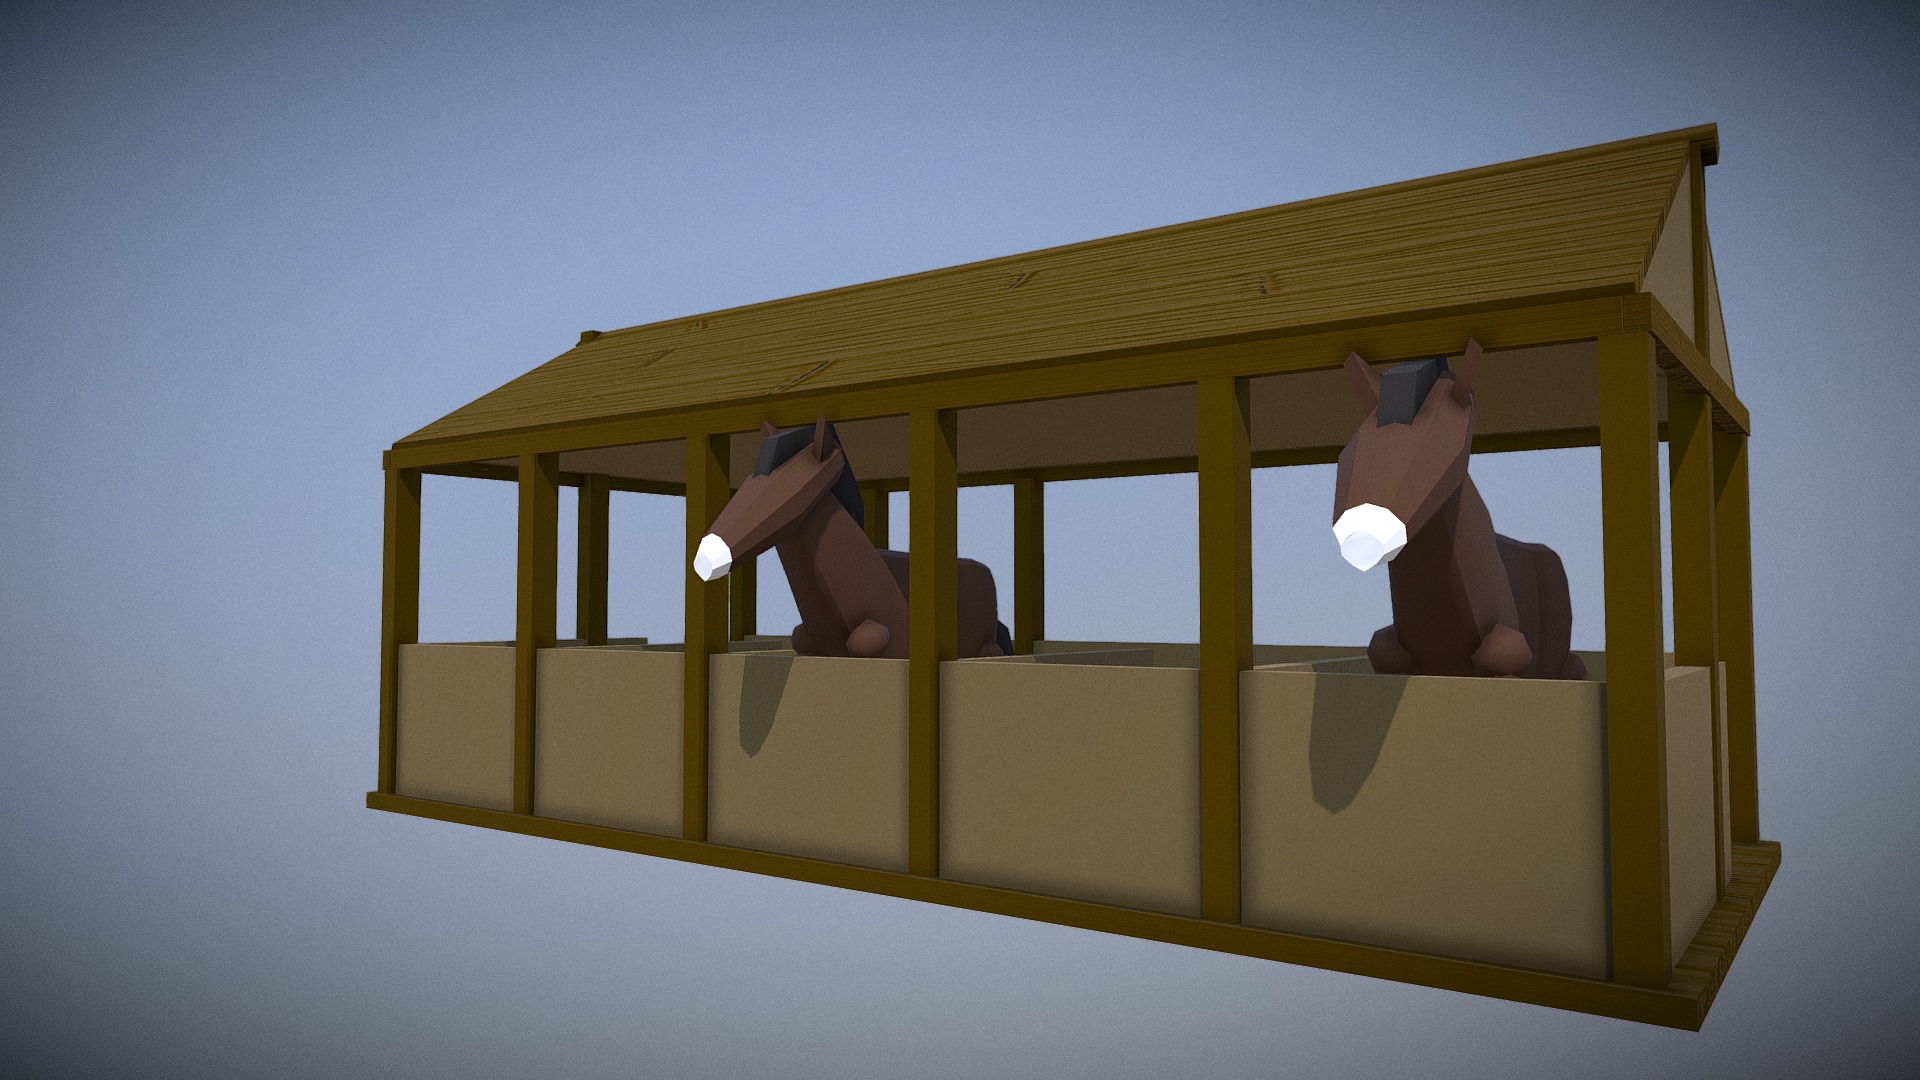 An Stable with 2 horses in it rigged, textured and bumpmap. Made in 3ds max.
Polys 1,315. Verts 1,436 3d model